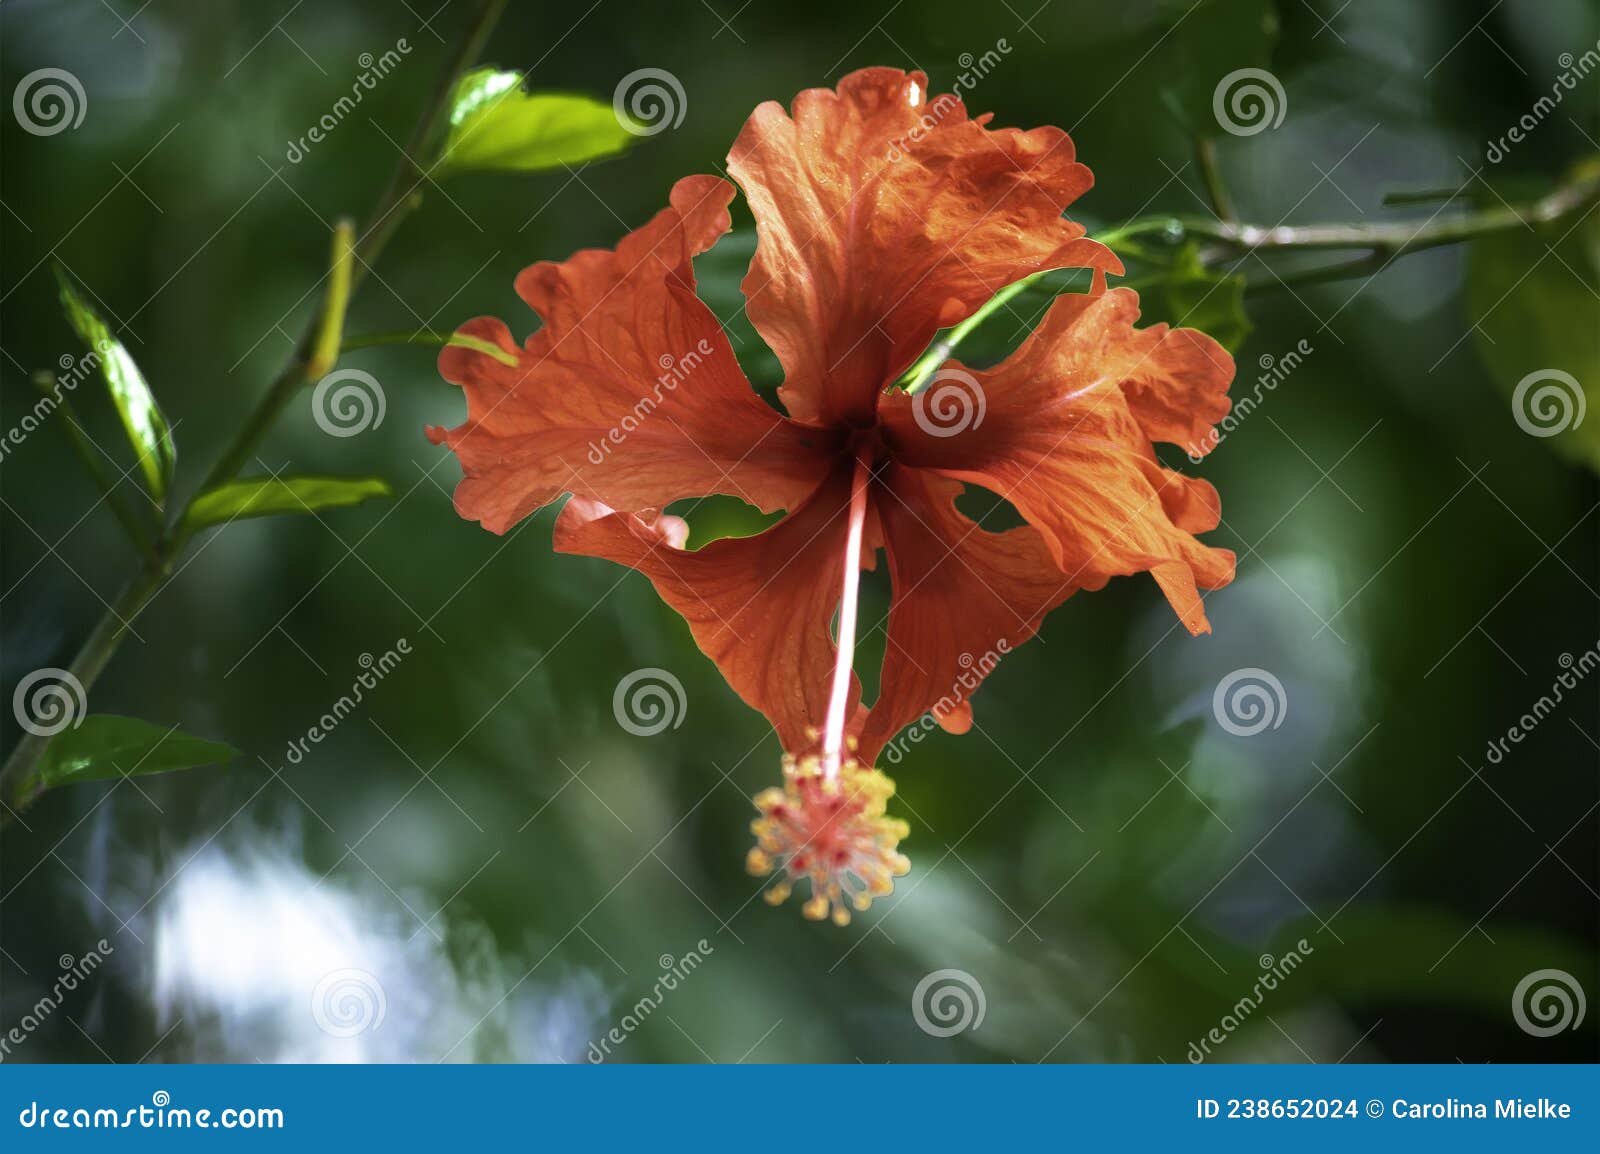 hibiscus rosa-sinensis flower in the jungle